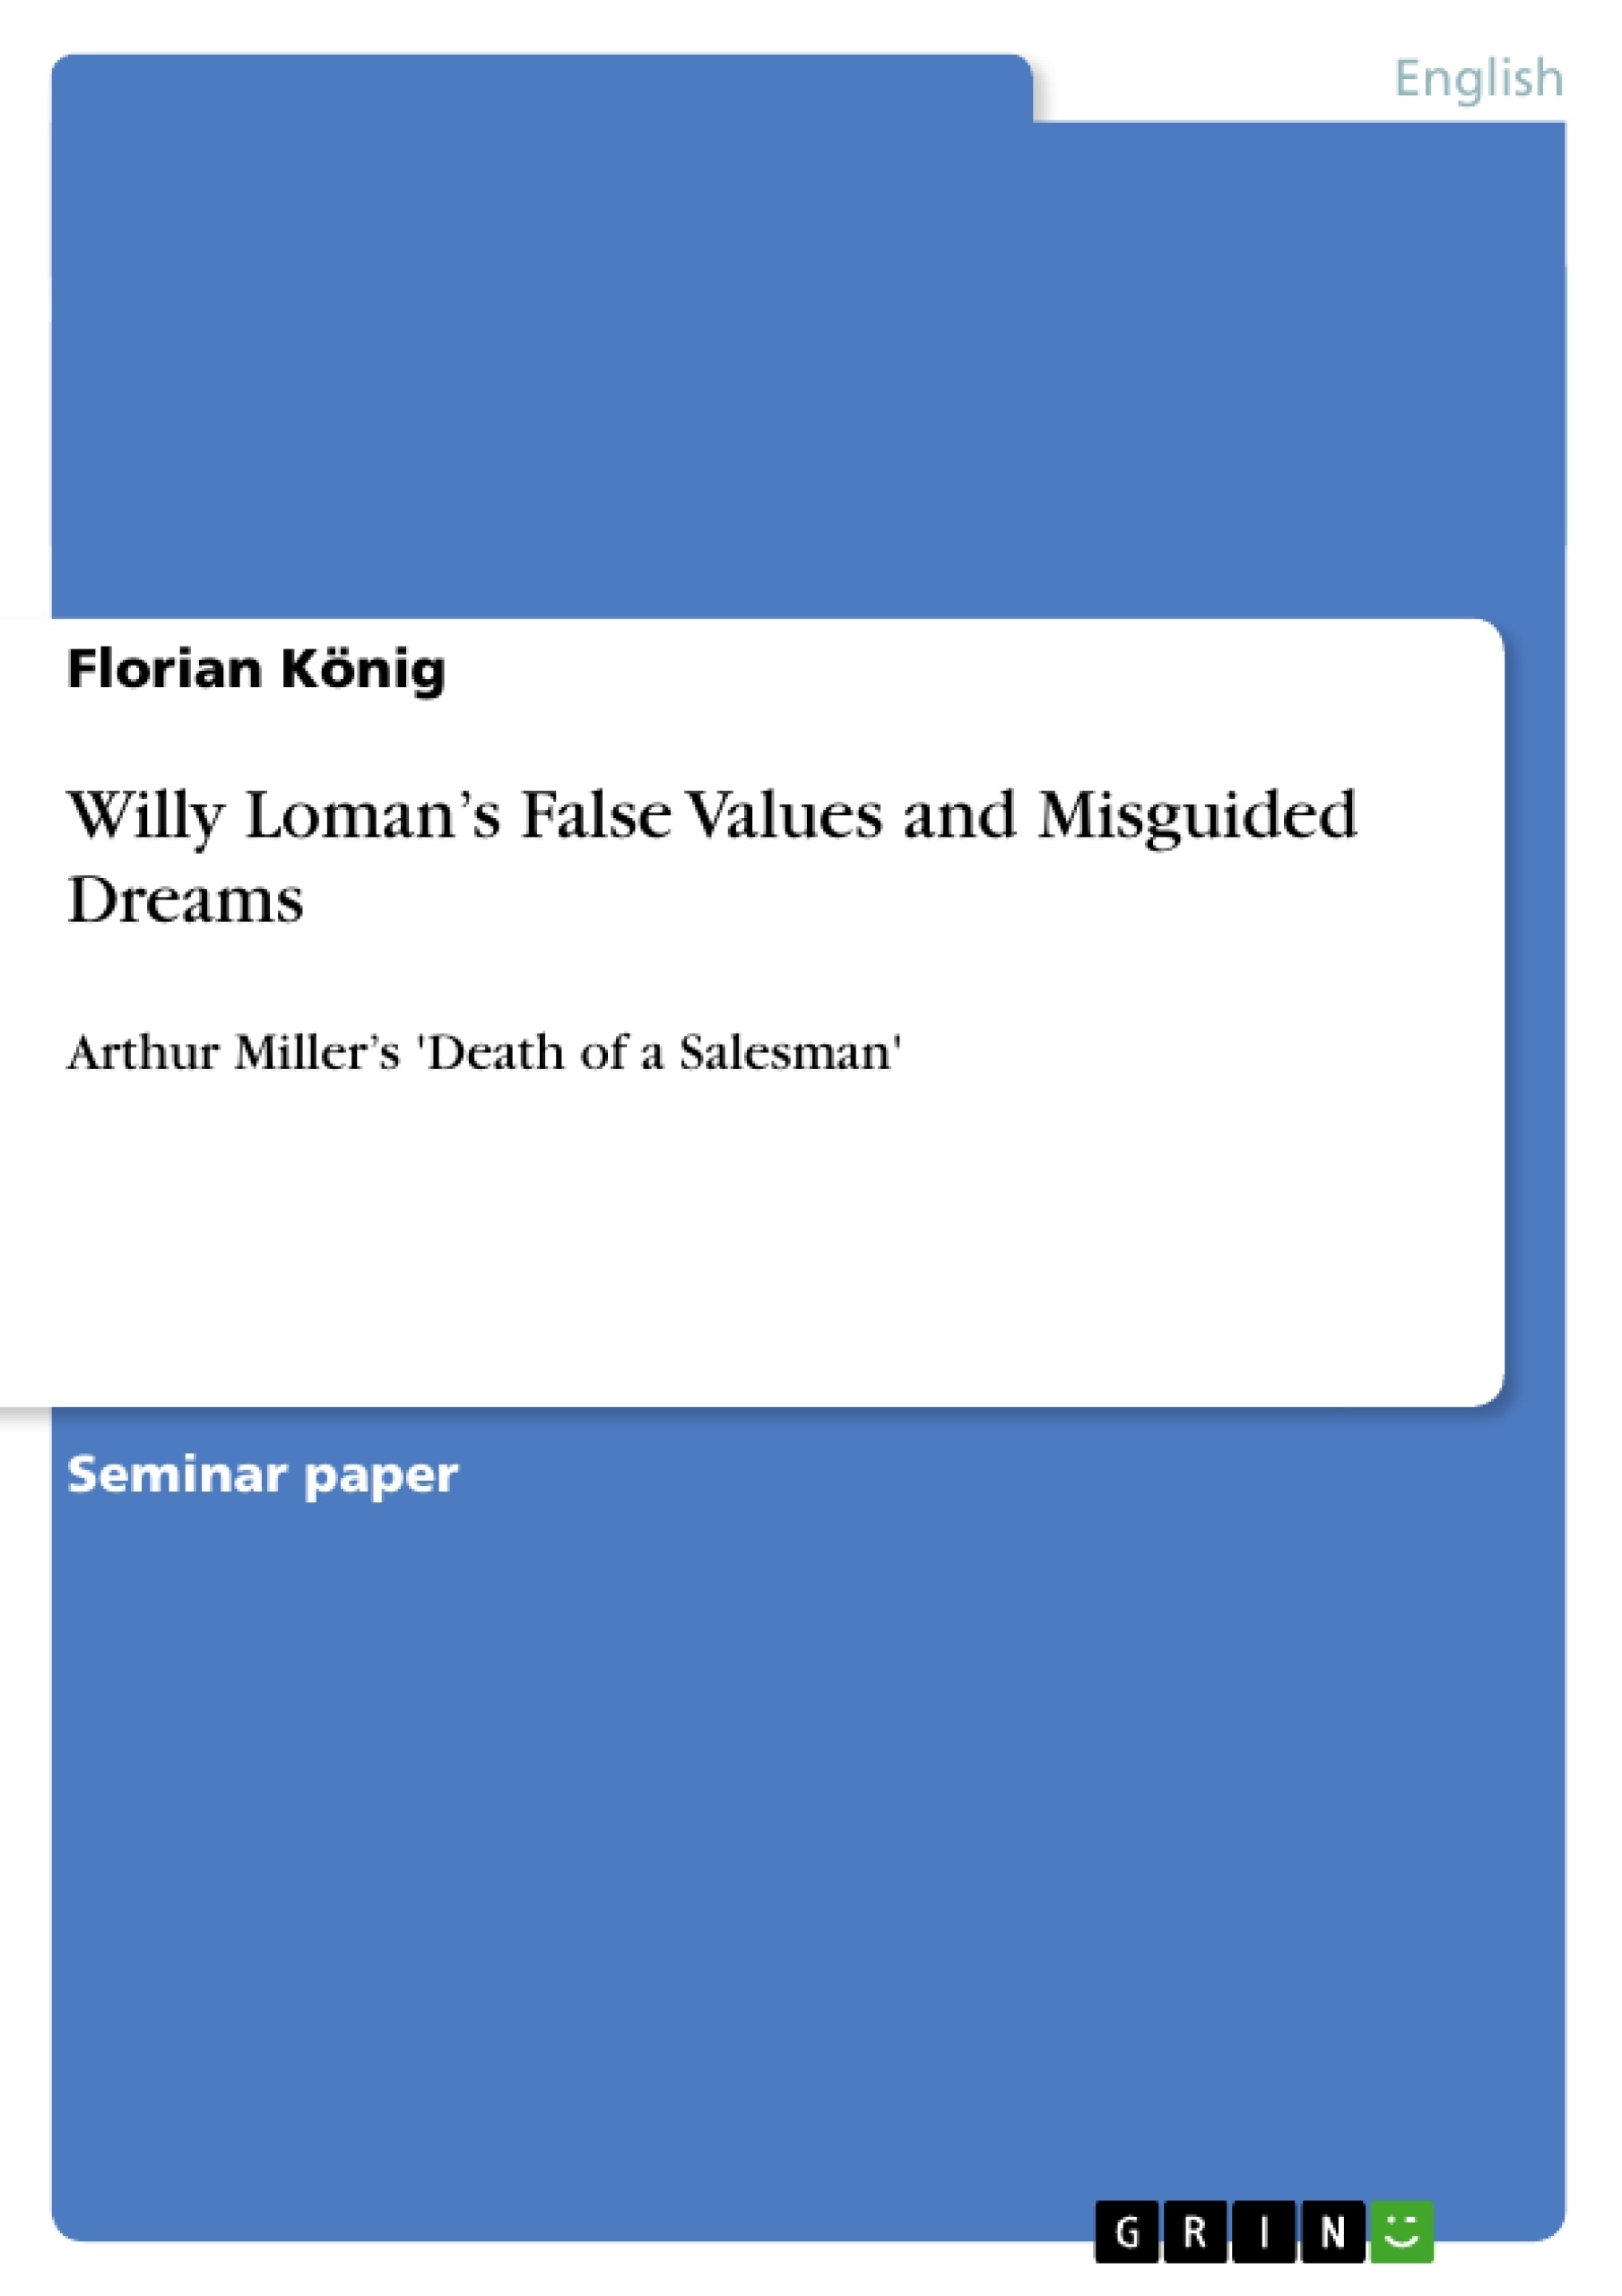 Title: Willy Loman’s False Values and Misguided Dreams